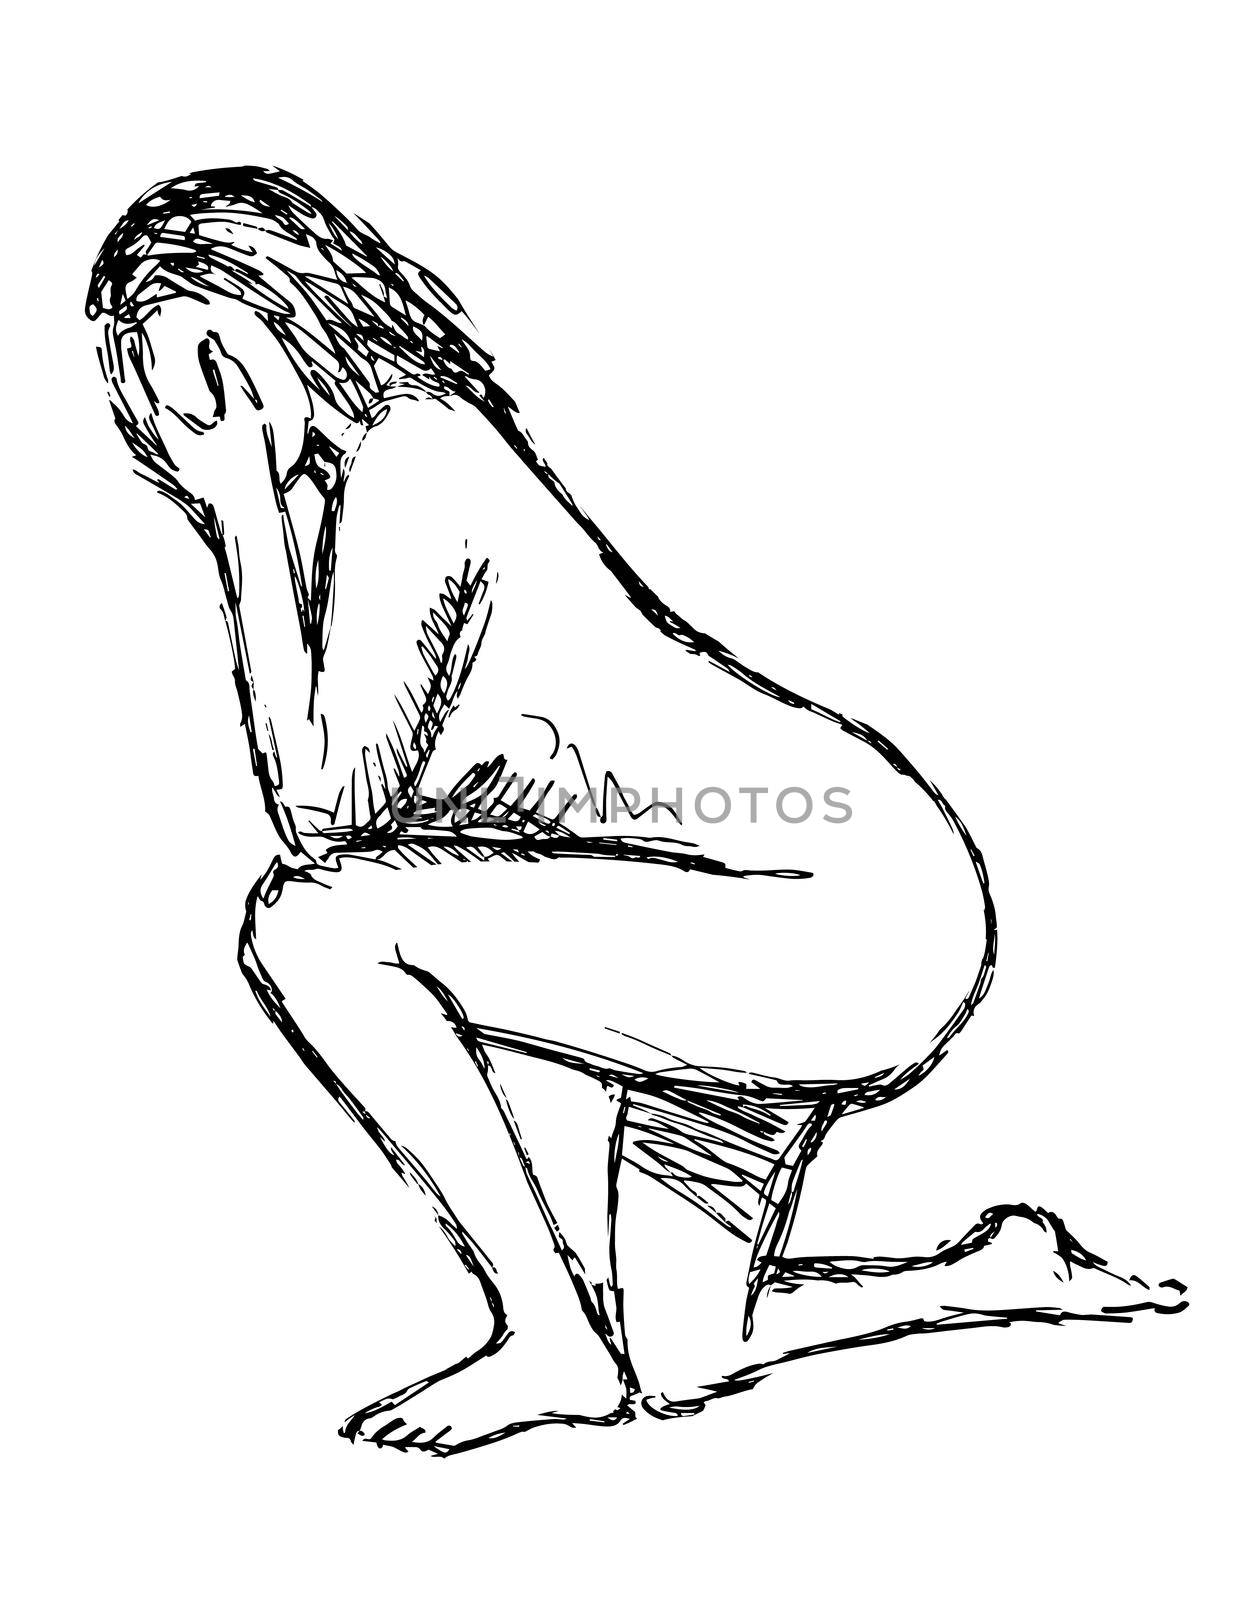 Nude Female Figure Kneeling on One Knee With Hand Covering Face Doodle Art Line Drawing  by patrimonio